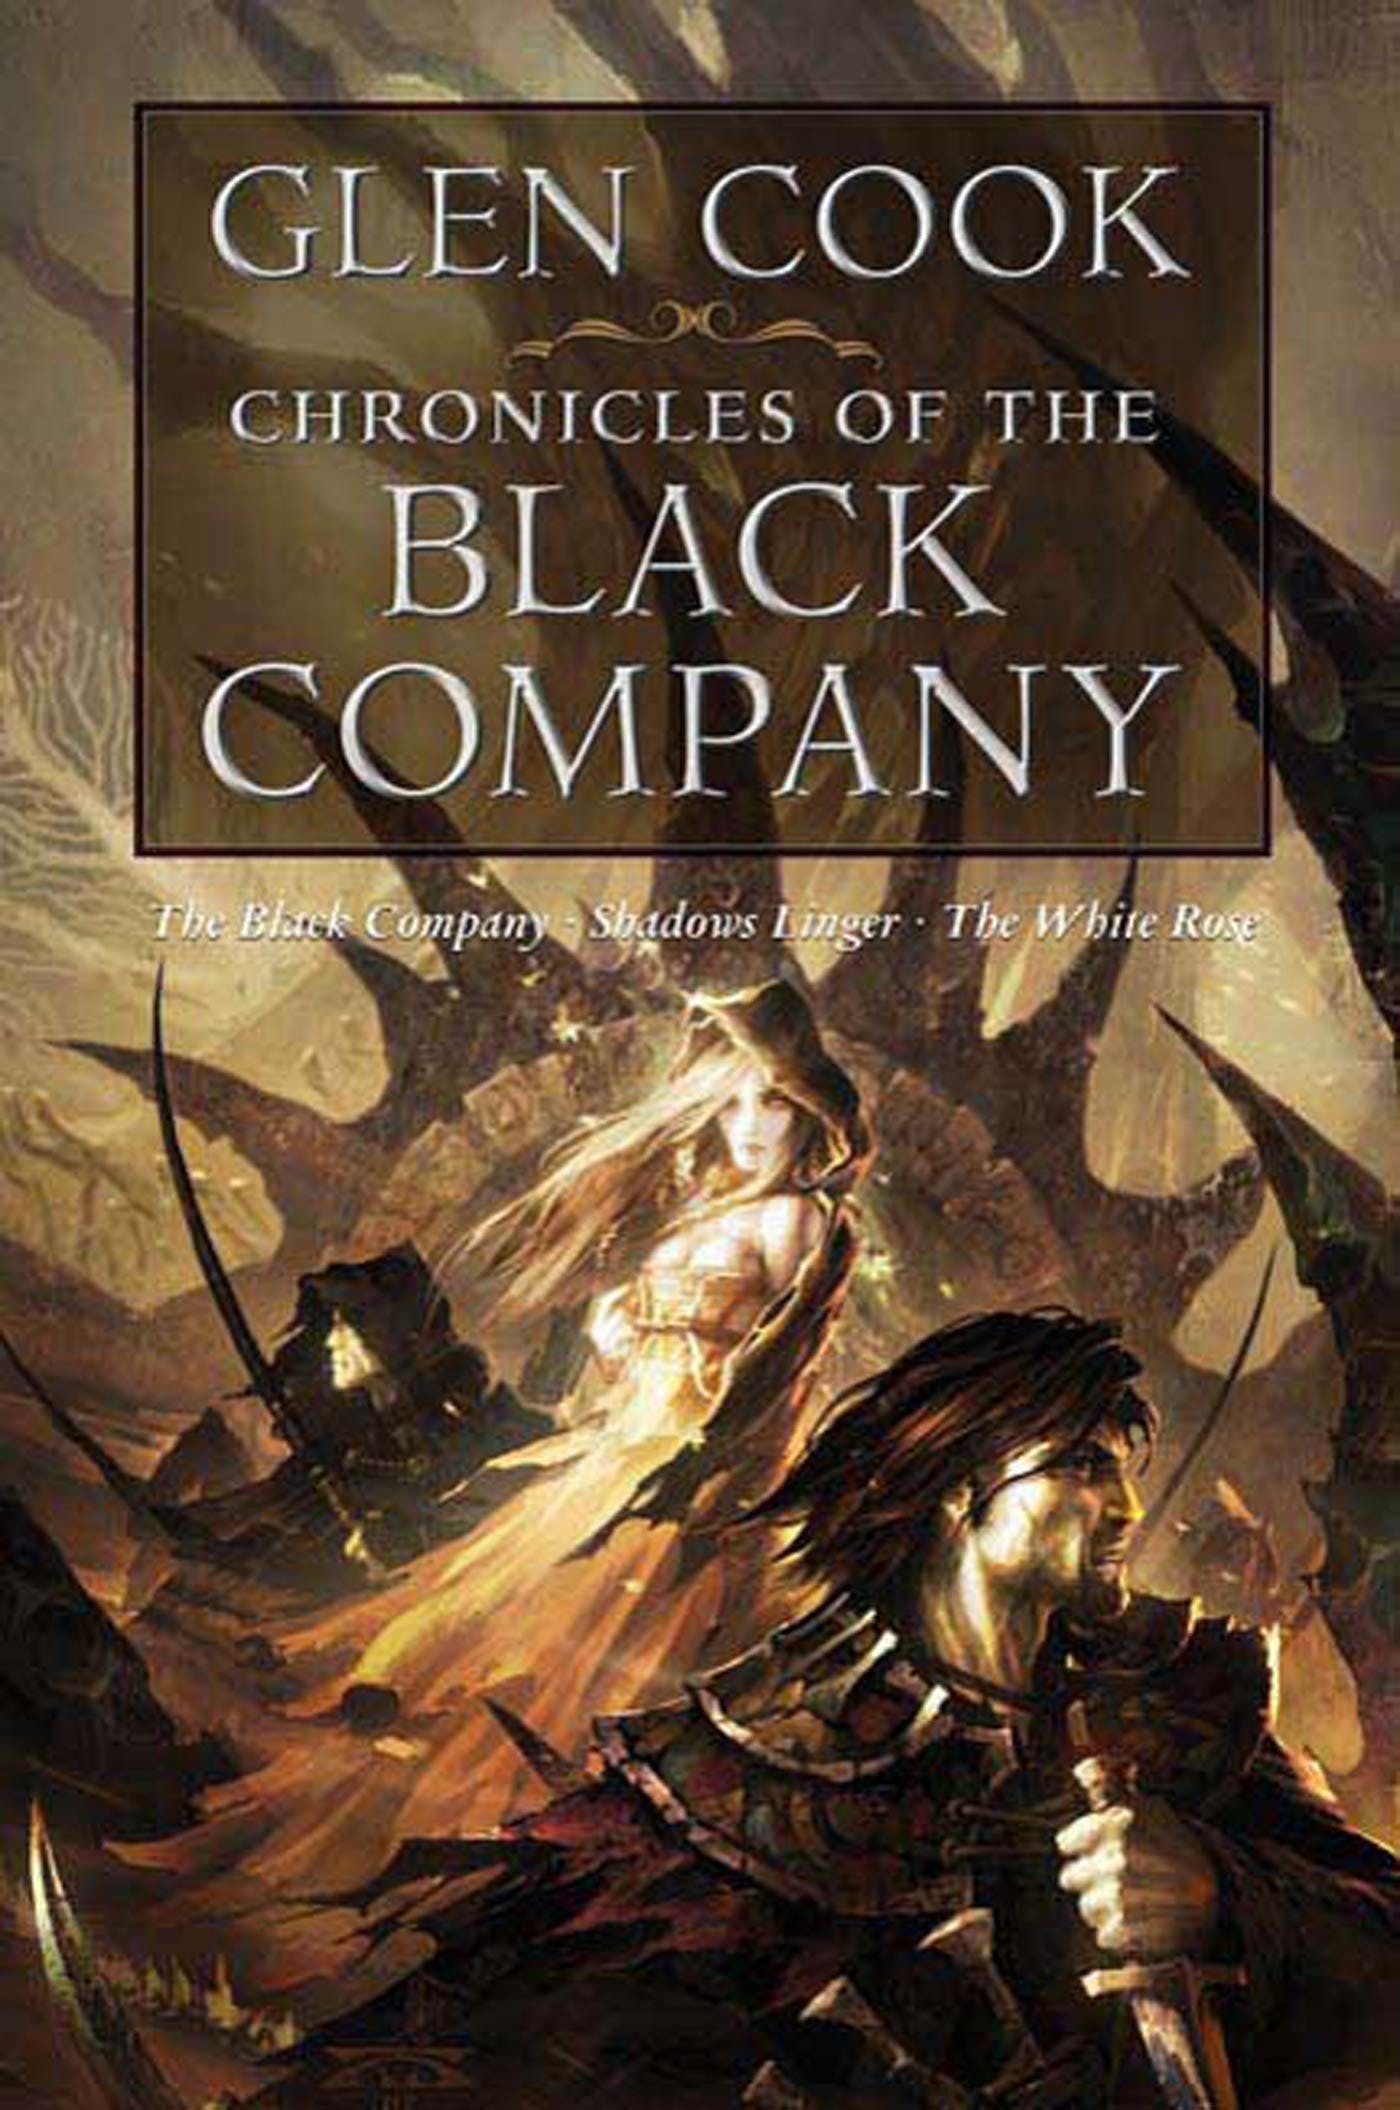 Glen Cook: Chronicles of the Black Company (2007, Tor Books)